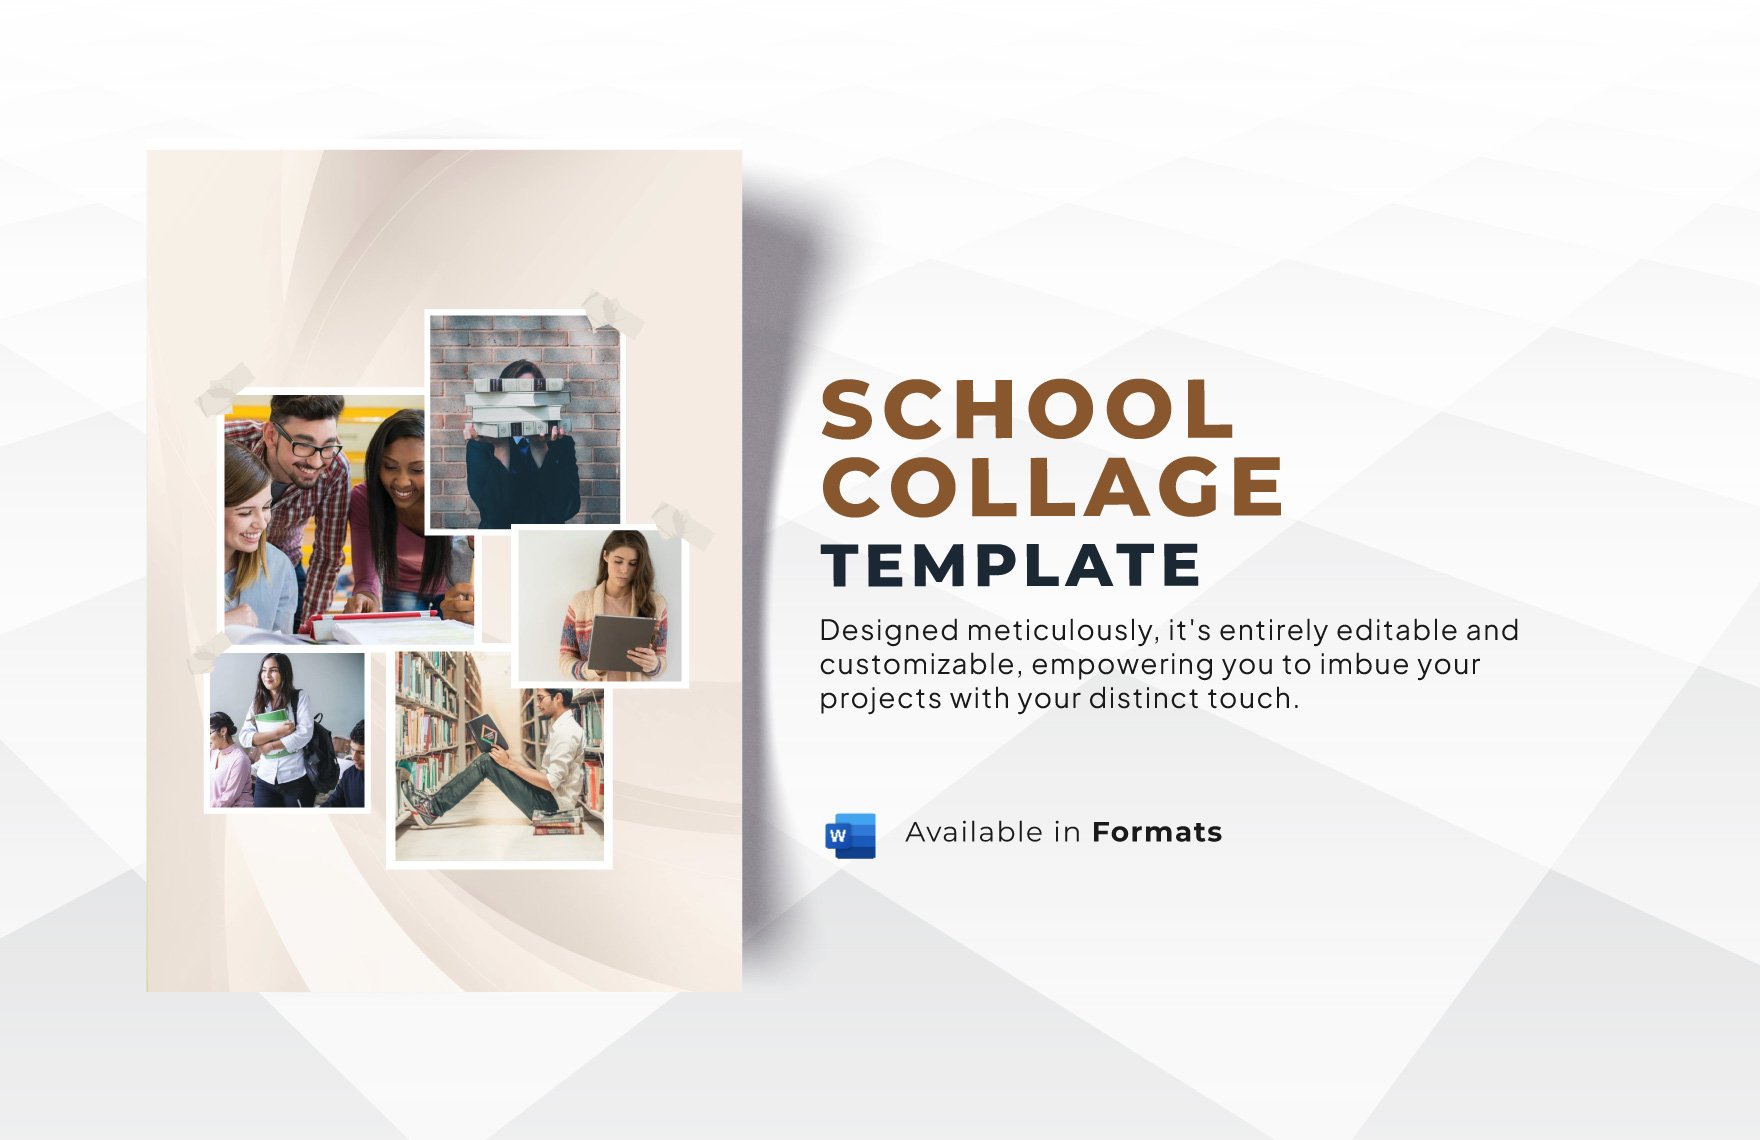 School Collage Template